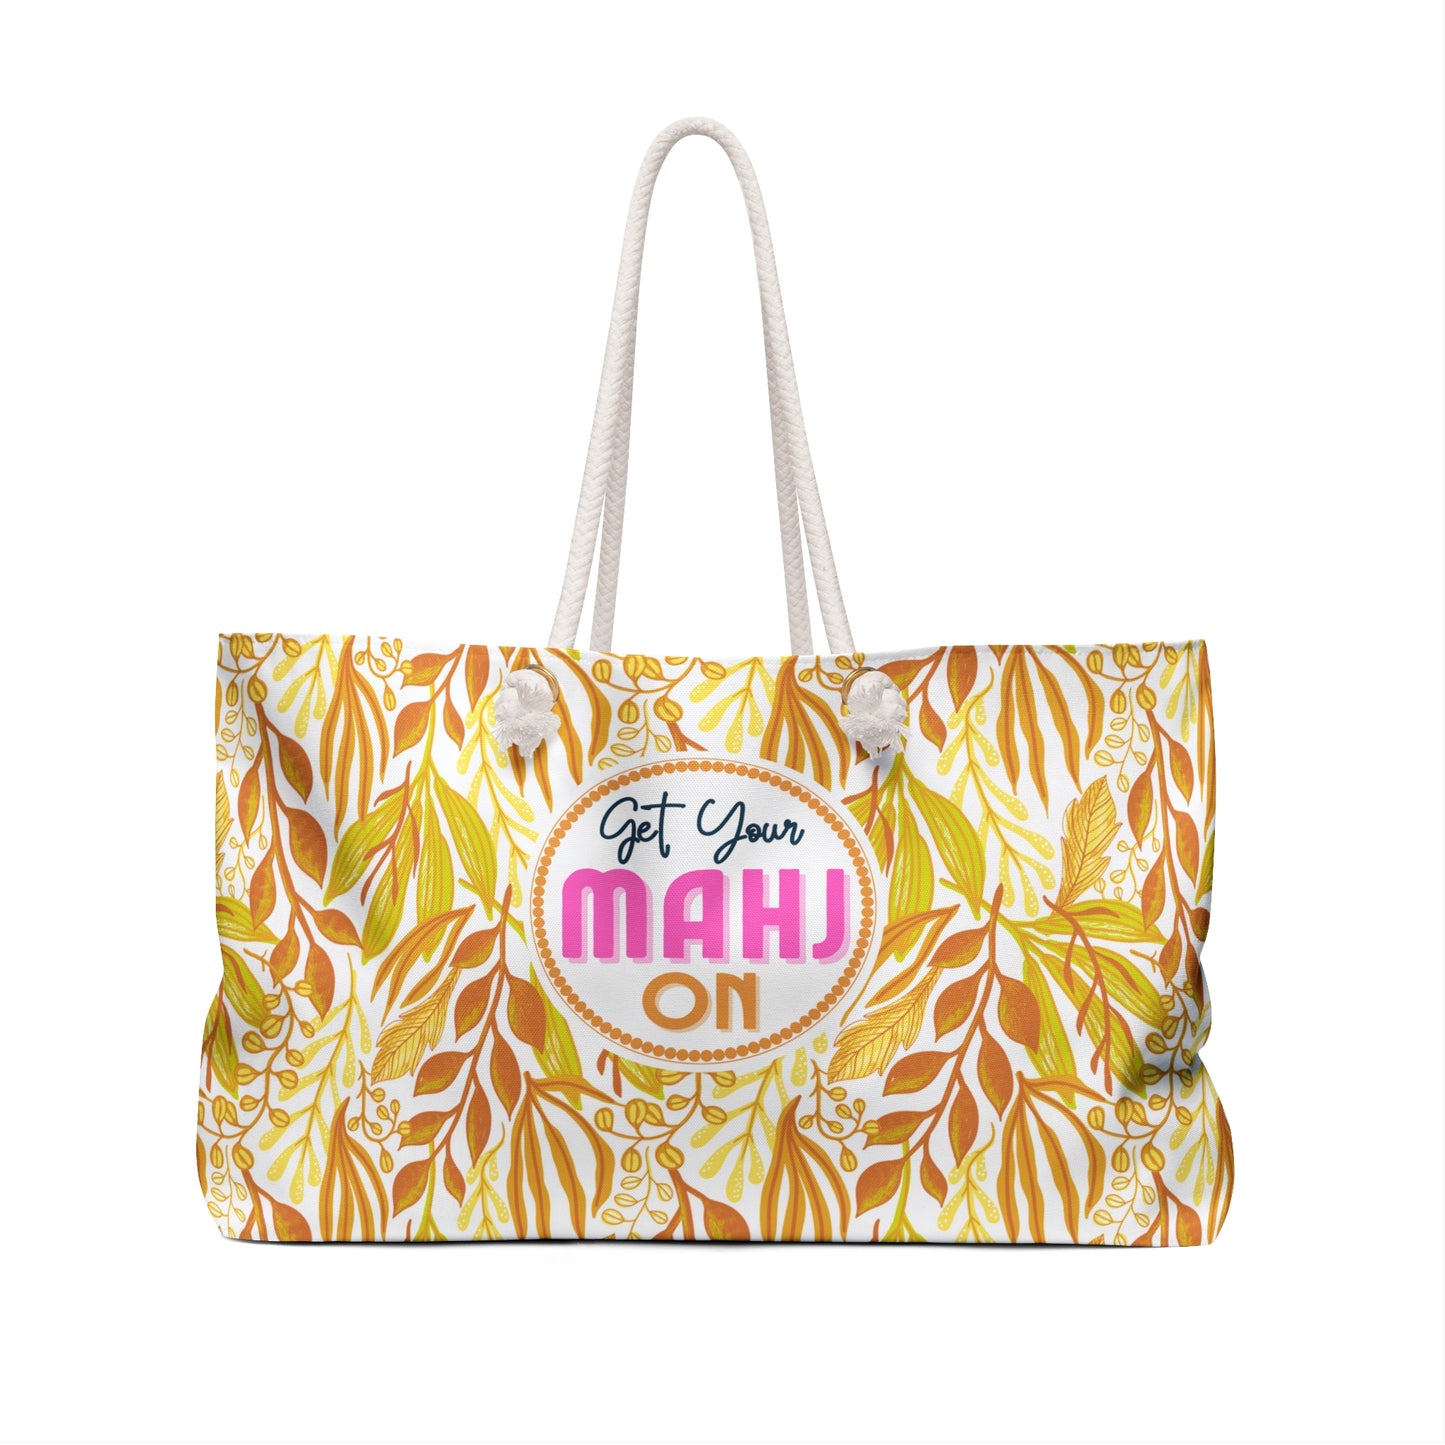 Mahjong Tote Bag. Oversize Carrying Bag to Hold Your Mahjongg Tiles, Mah Jongg Accessories and More. Yellow Nature Pattern.